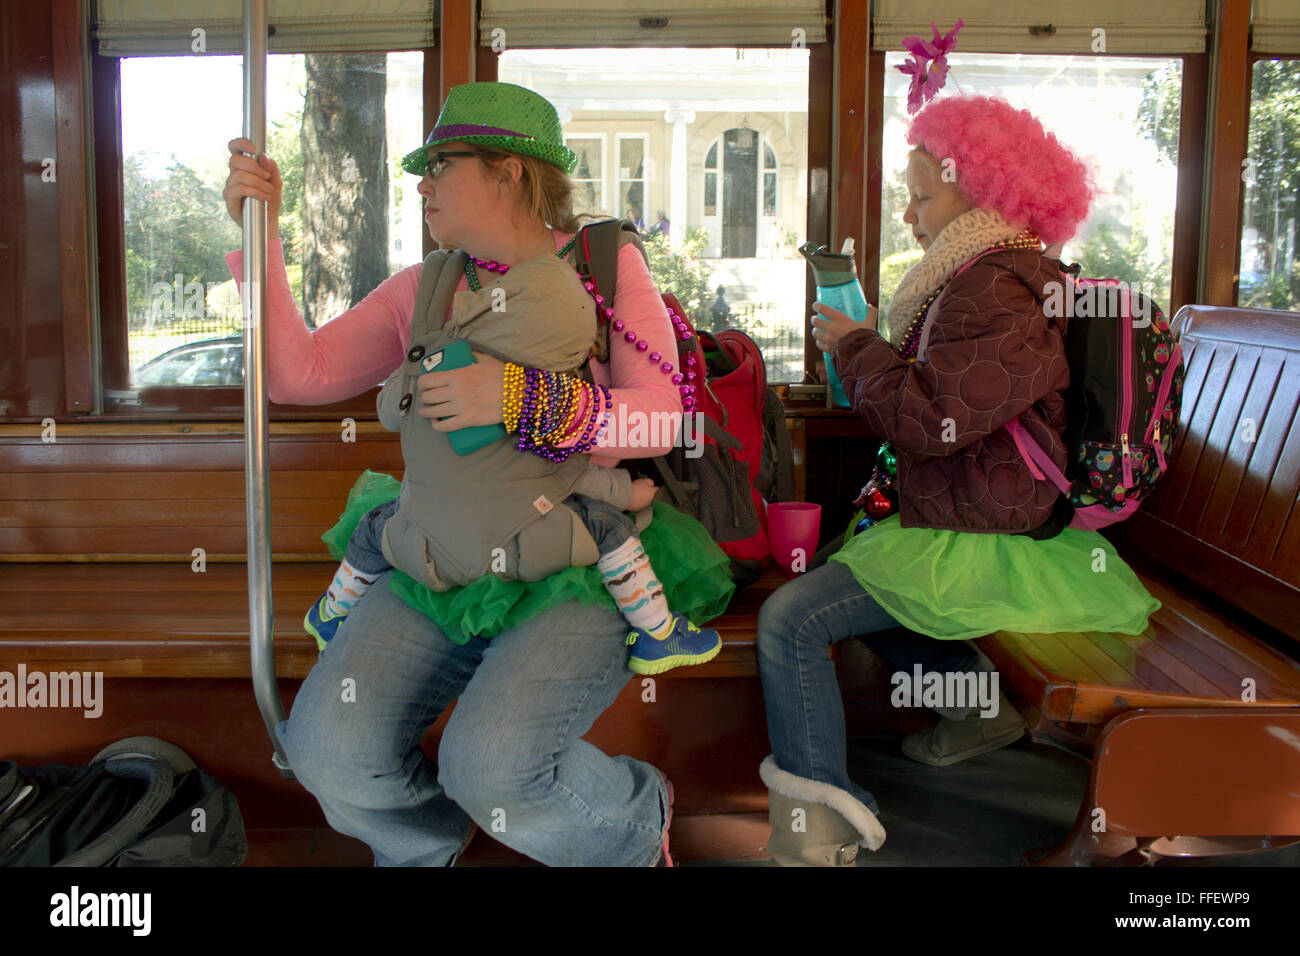 A mother rides the streetcar home with her daughter and baby after parades on Mardi Gras day, New Orleans, LA. Stock Photo